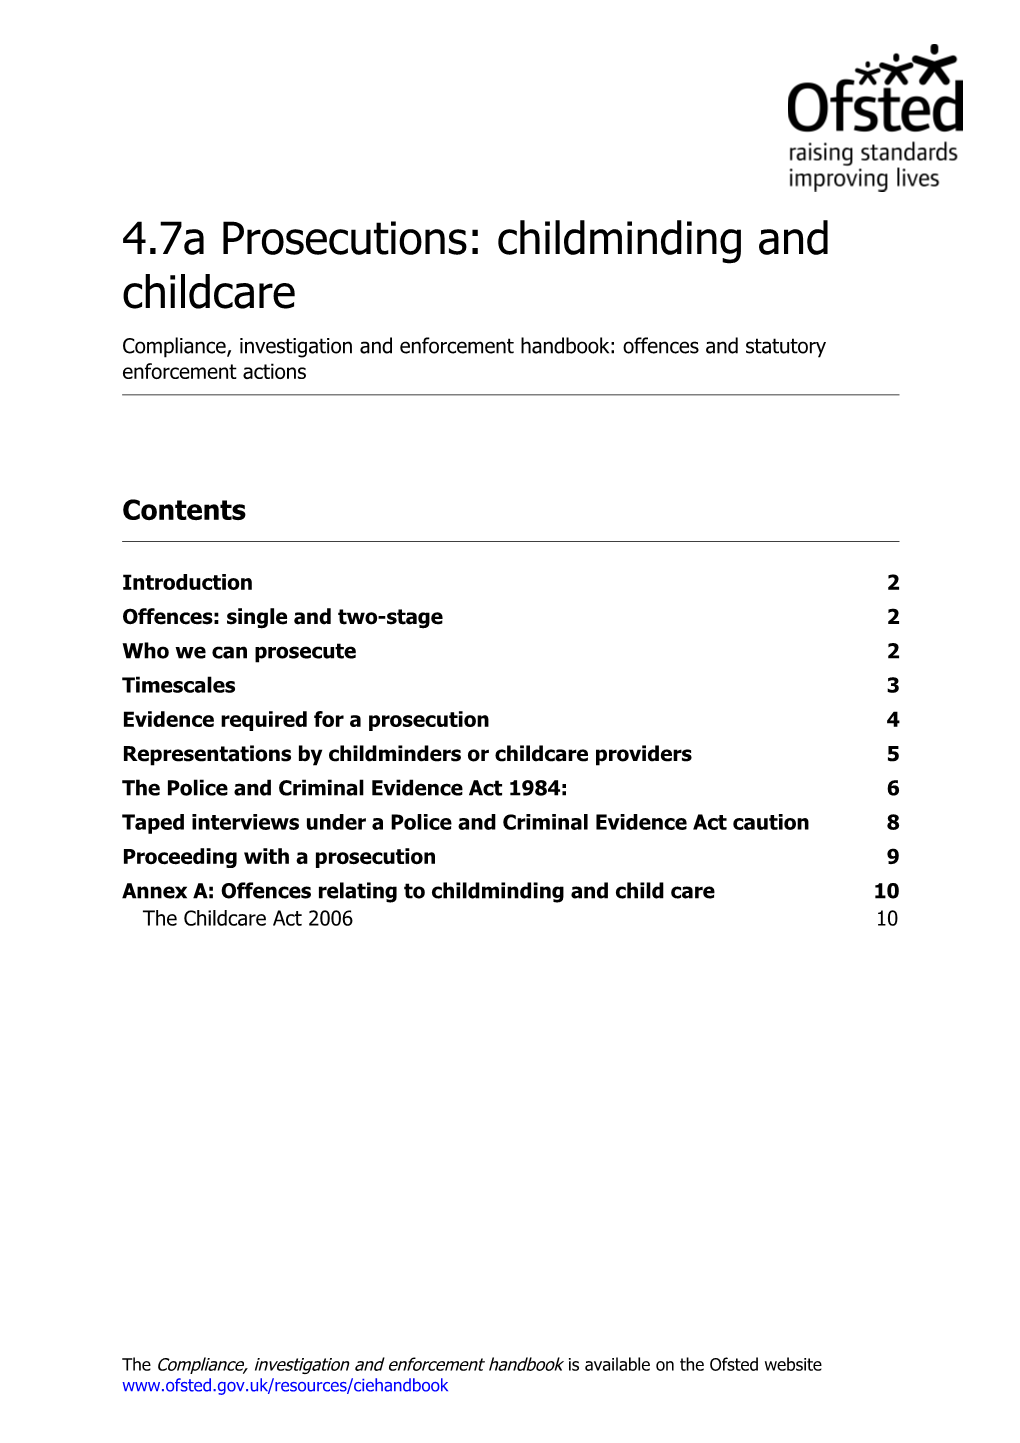 4.7A Prosecutions: Childminding and Childcare